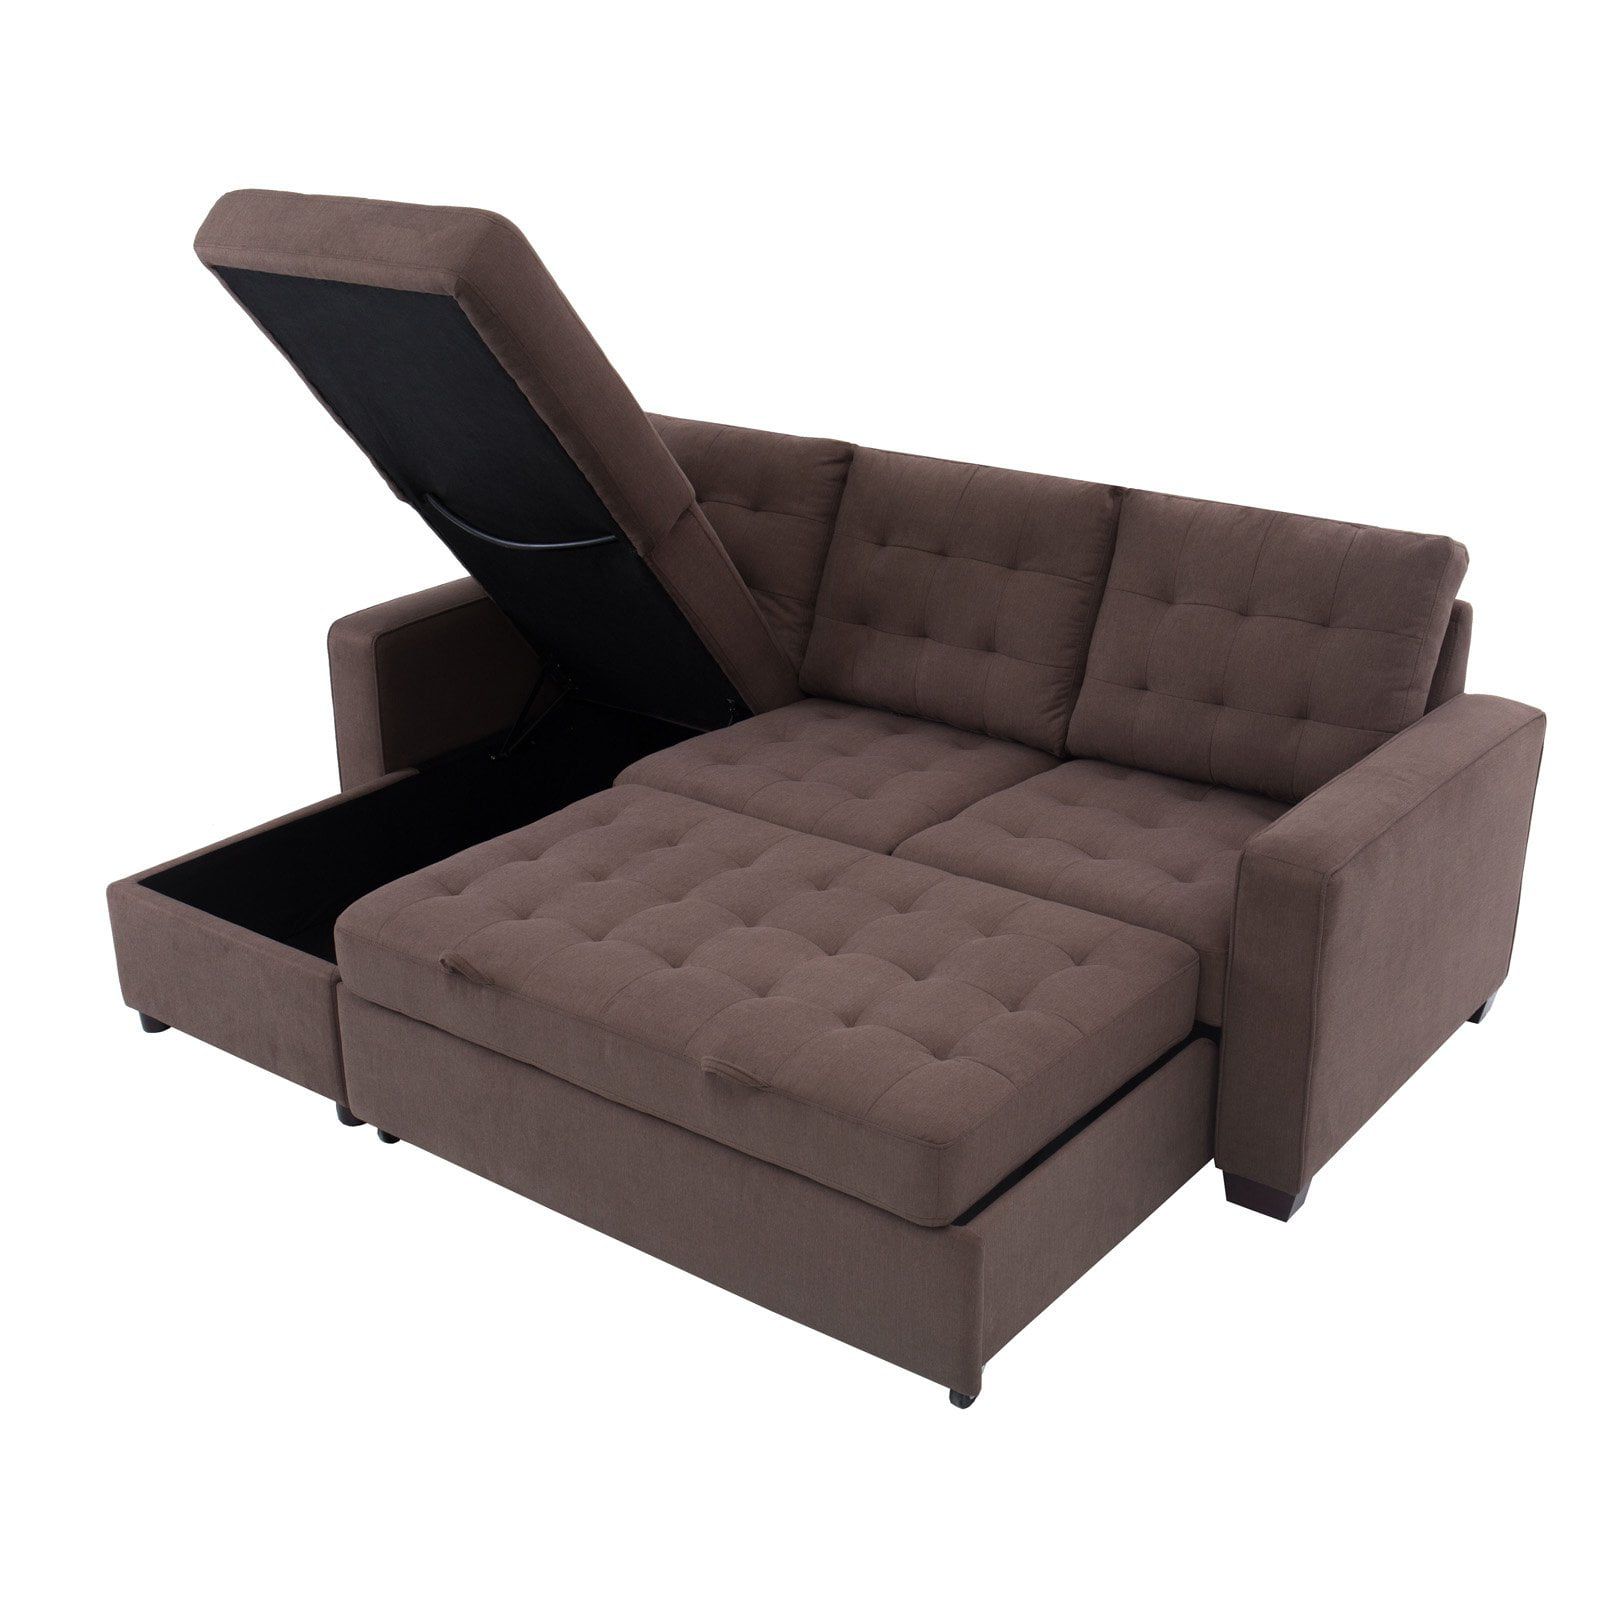 Newest Queen Size Convertible Sofa Beds Throughout Bostal Serta Sofa Bed Convertible: Converts Into A Sofa, Chaise, Bed (View 15 of 15)